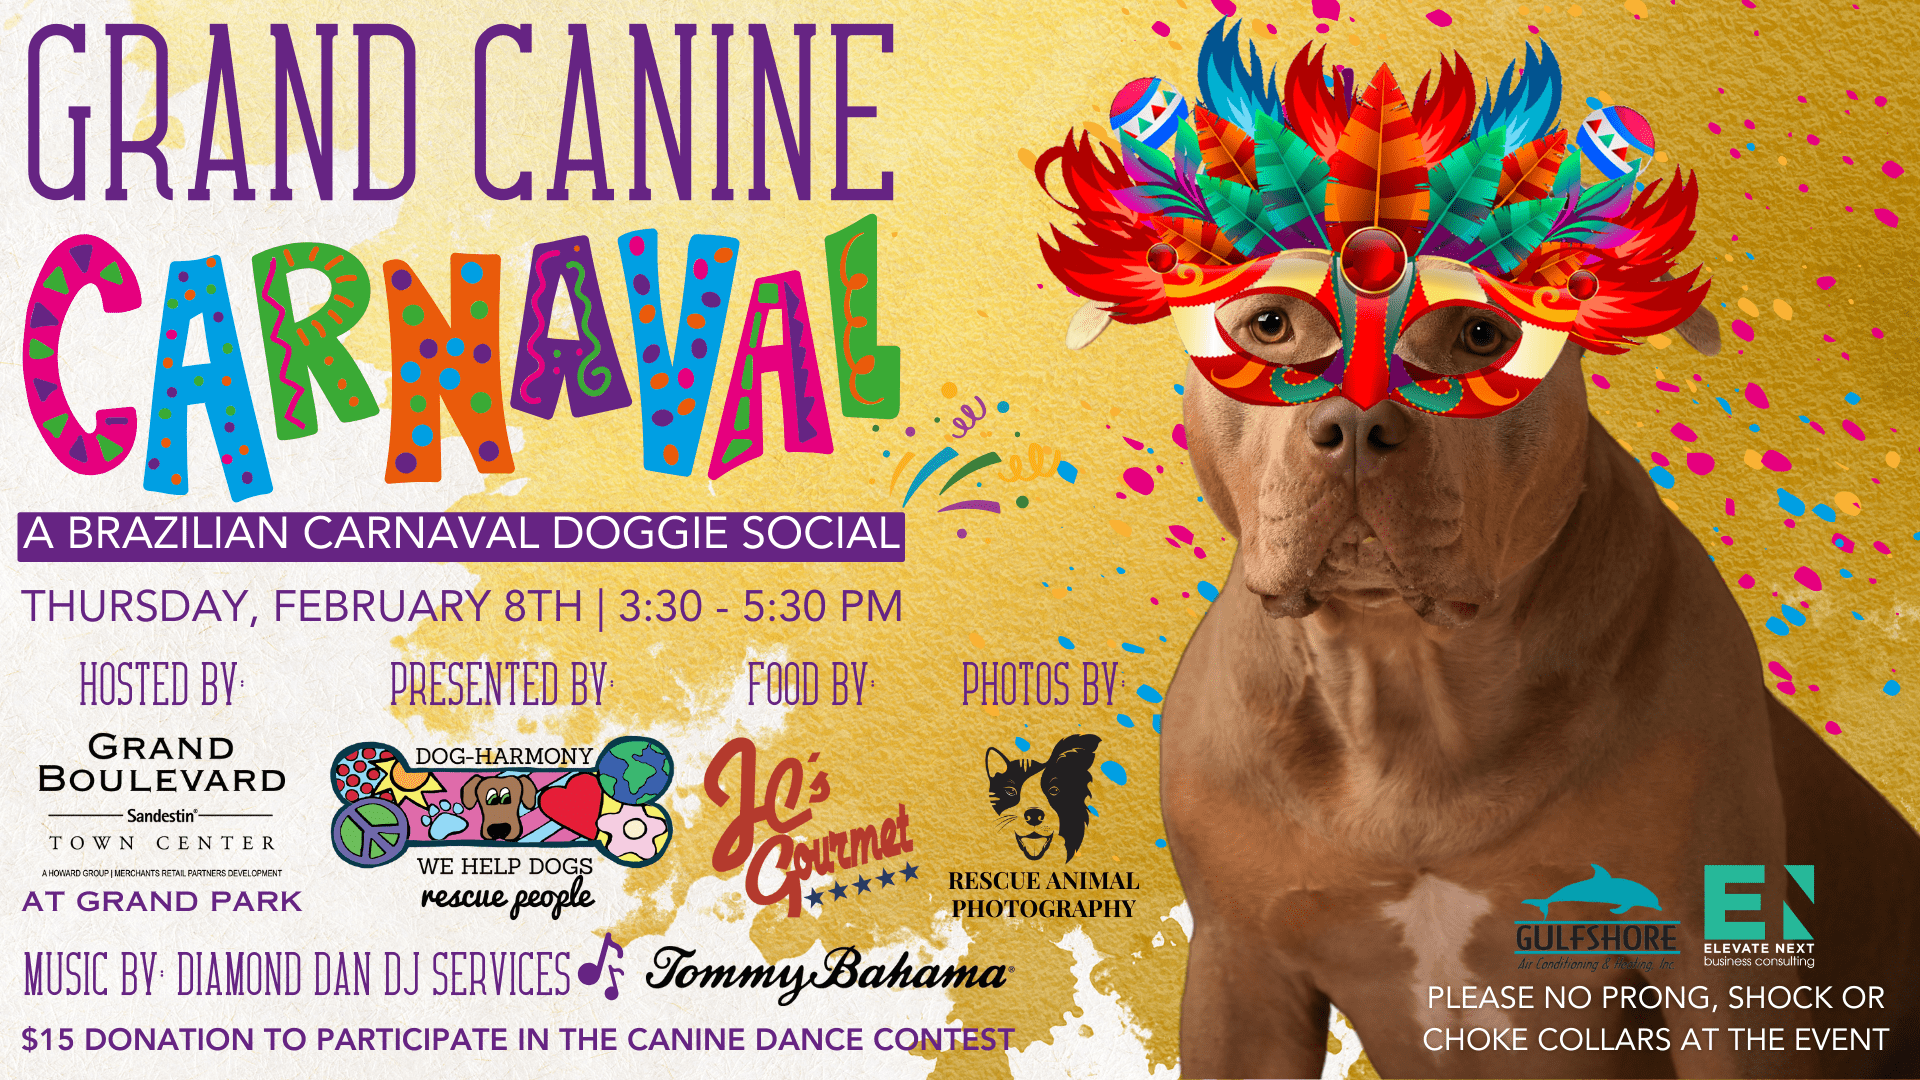 thumbnail image for grand canine carnaval doggie social at grand boulevard on February 8th from 3:30 - 5:30 pm at grand park